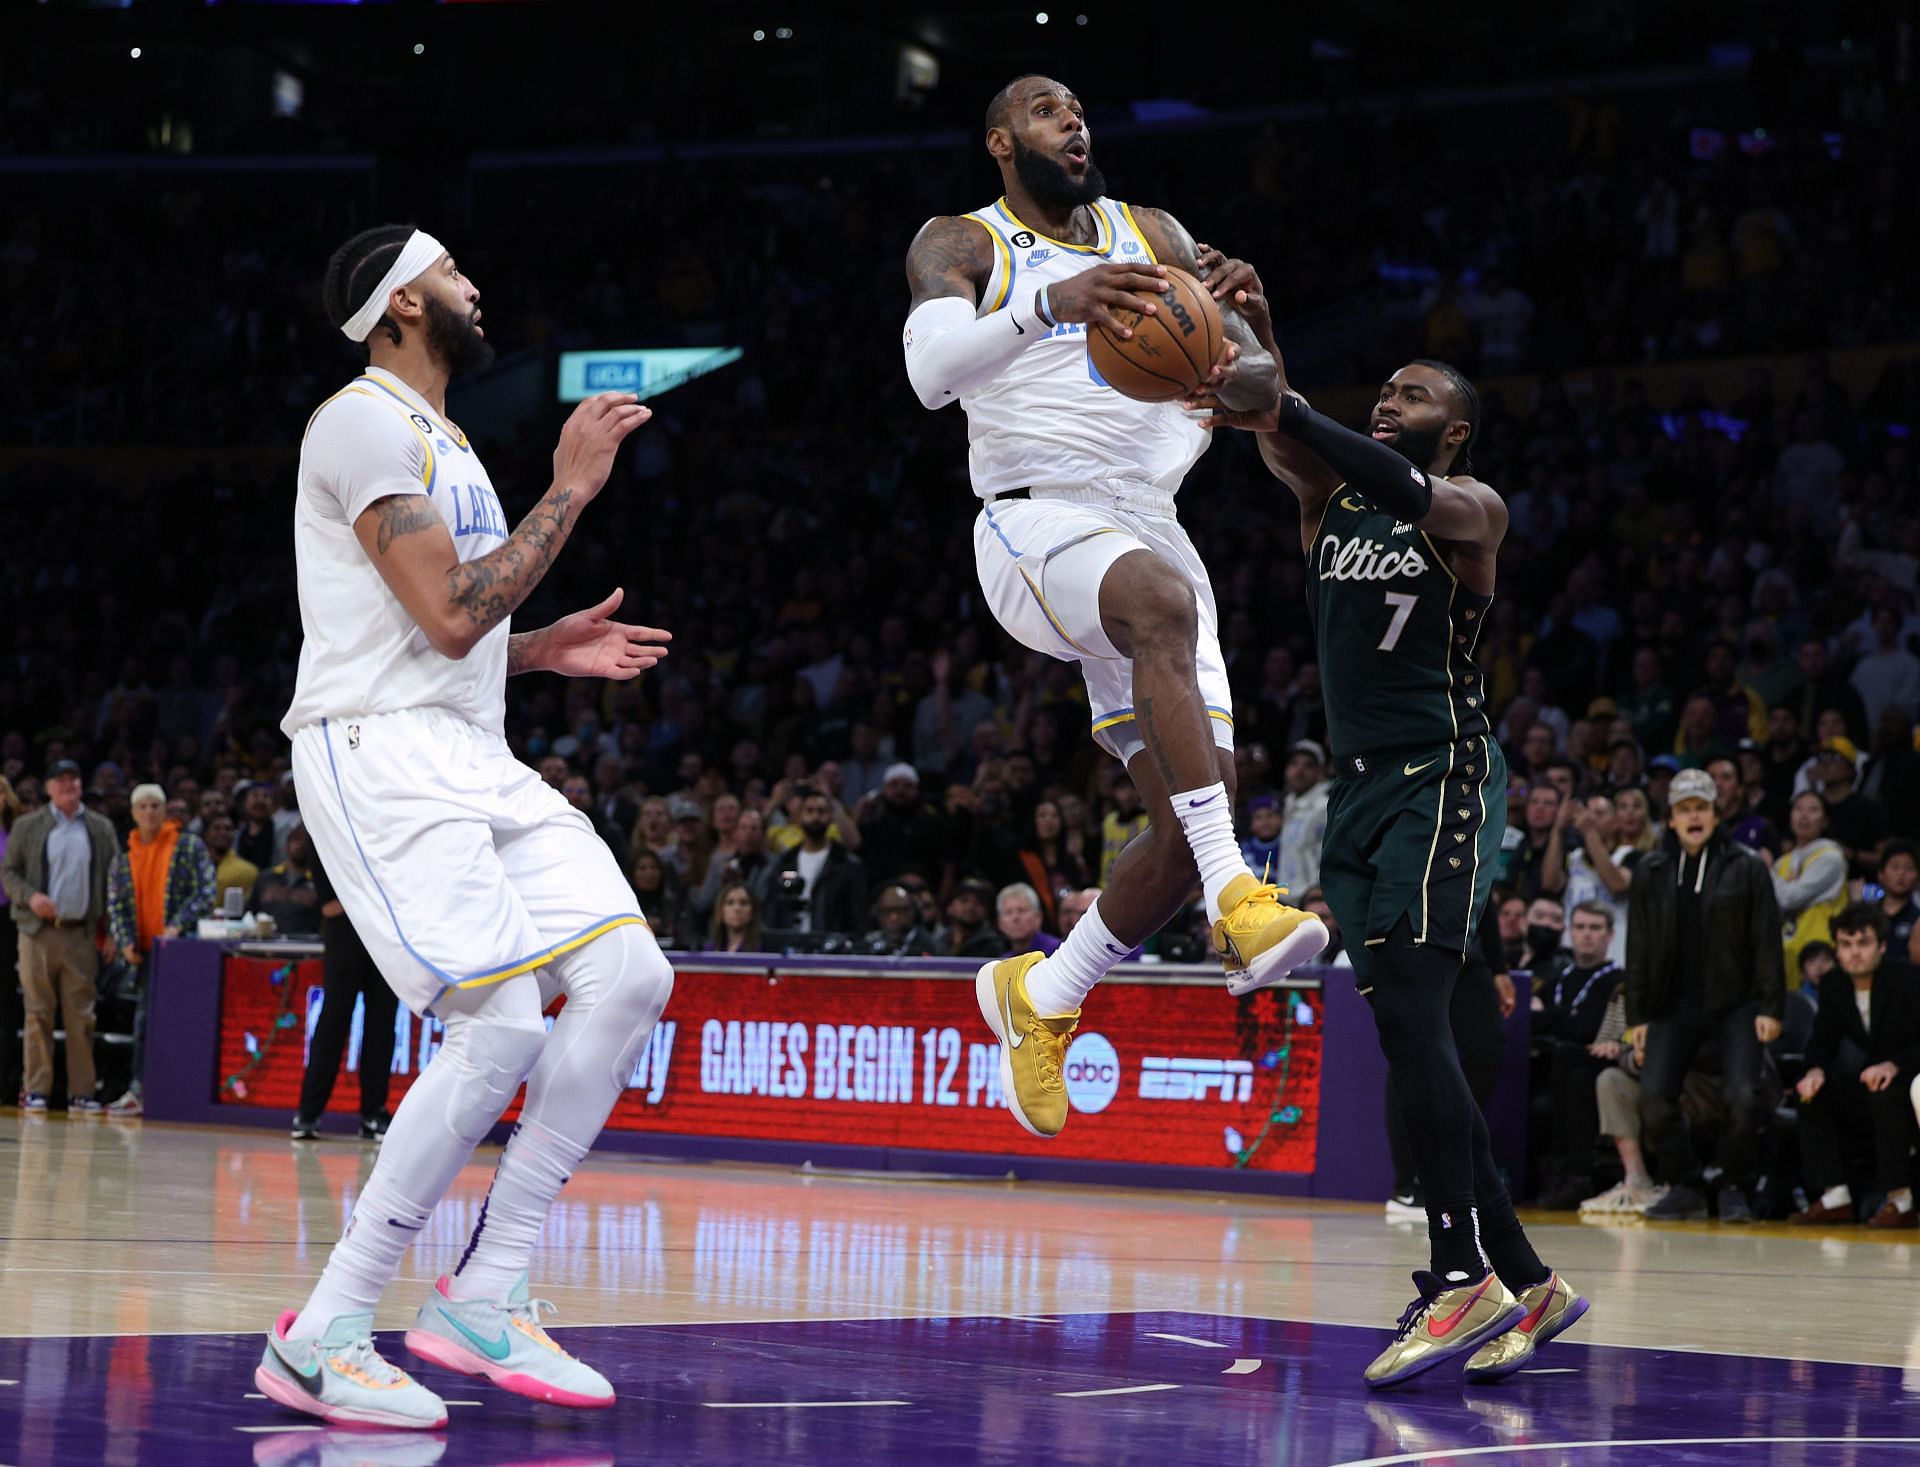 Watch LeBron James go coast-to-coast for monster dunk against the